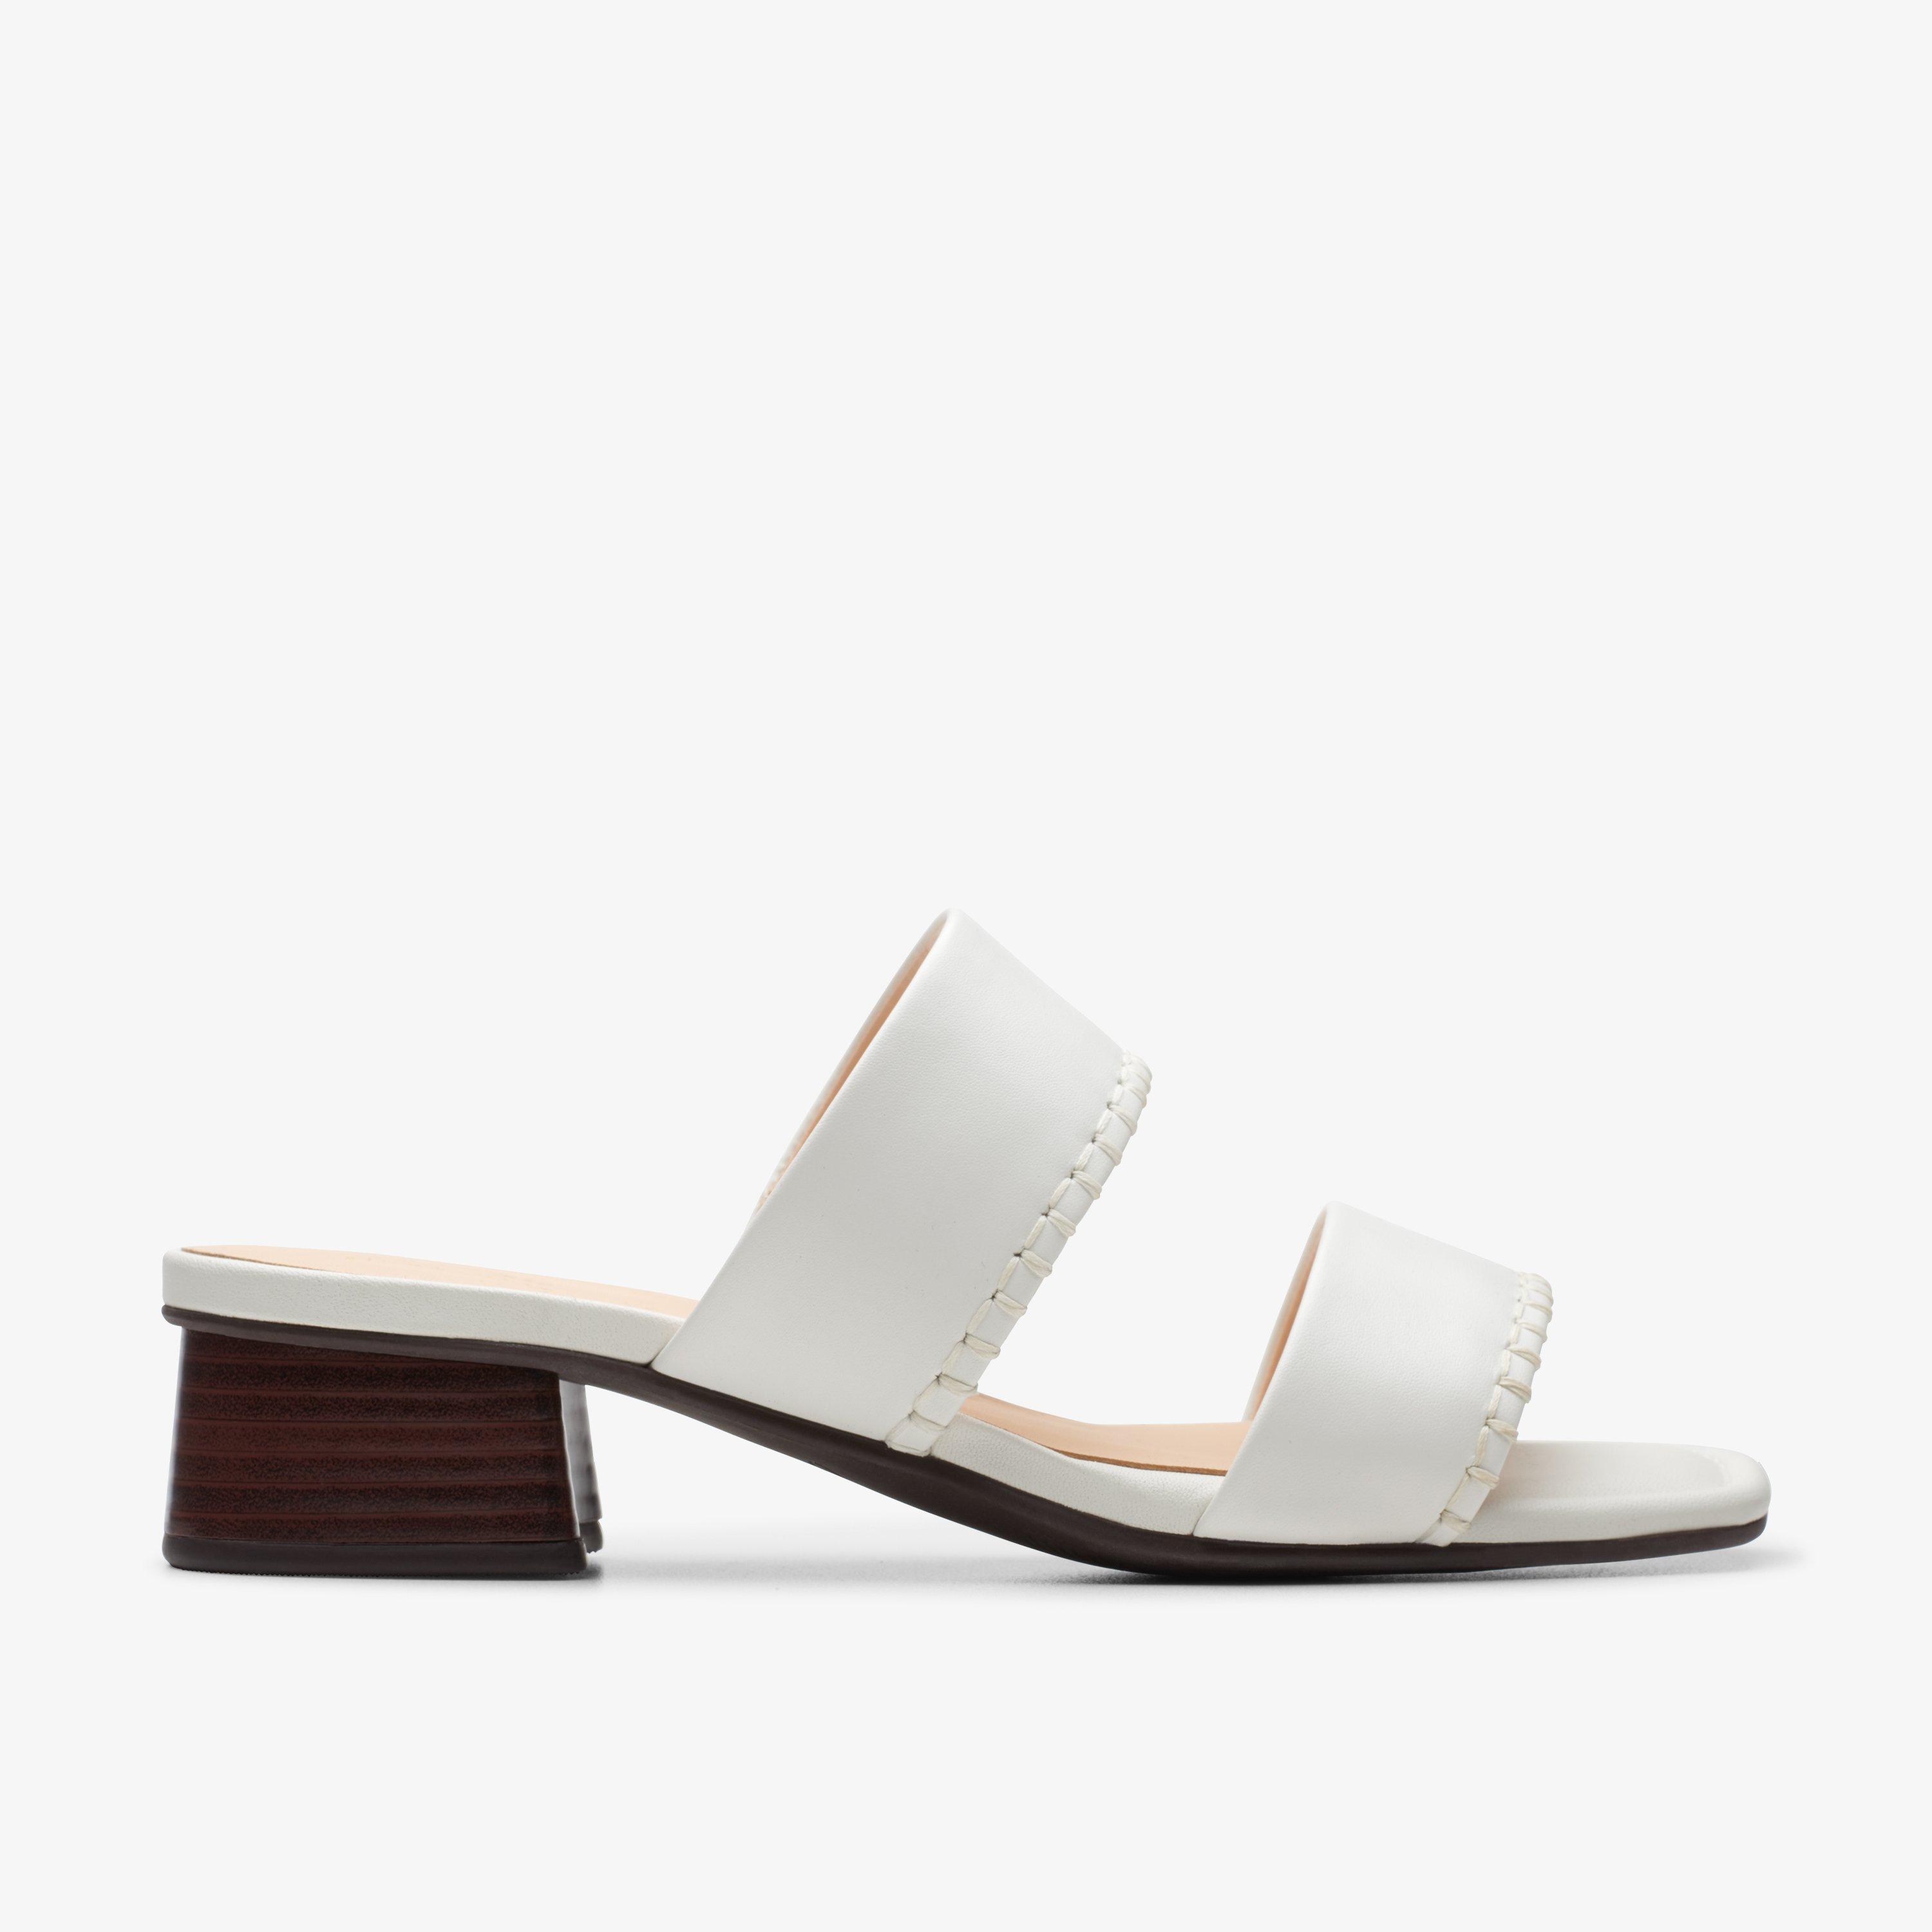 WOMENS Serina35 Mule Off White Leather Heeled Sandals | Clarks US